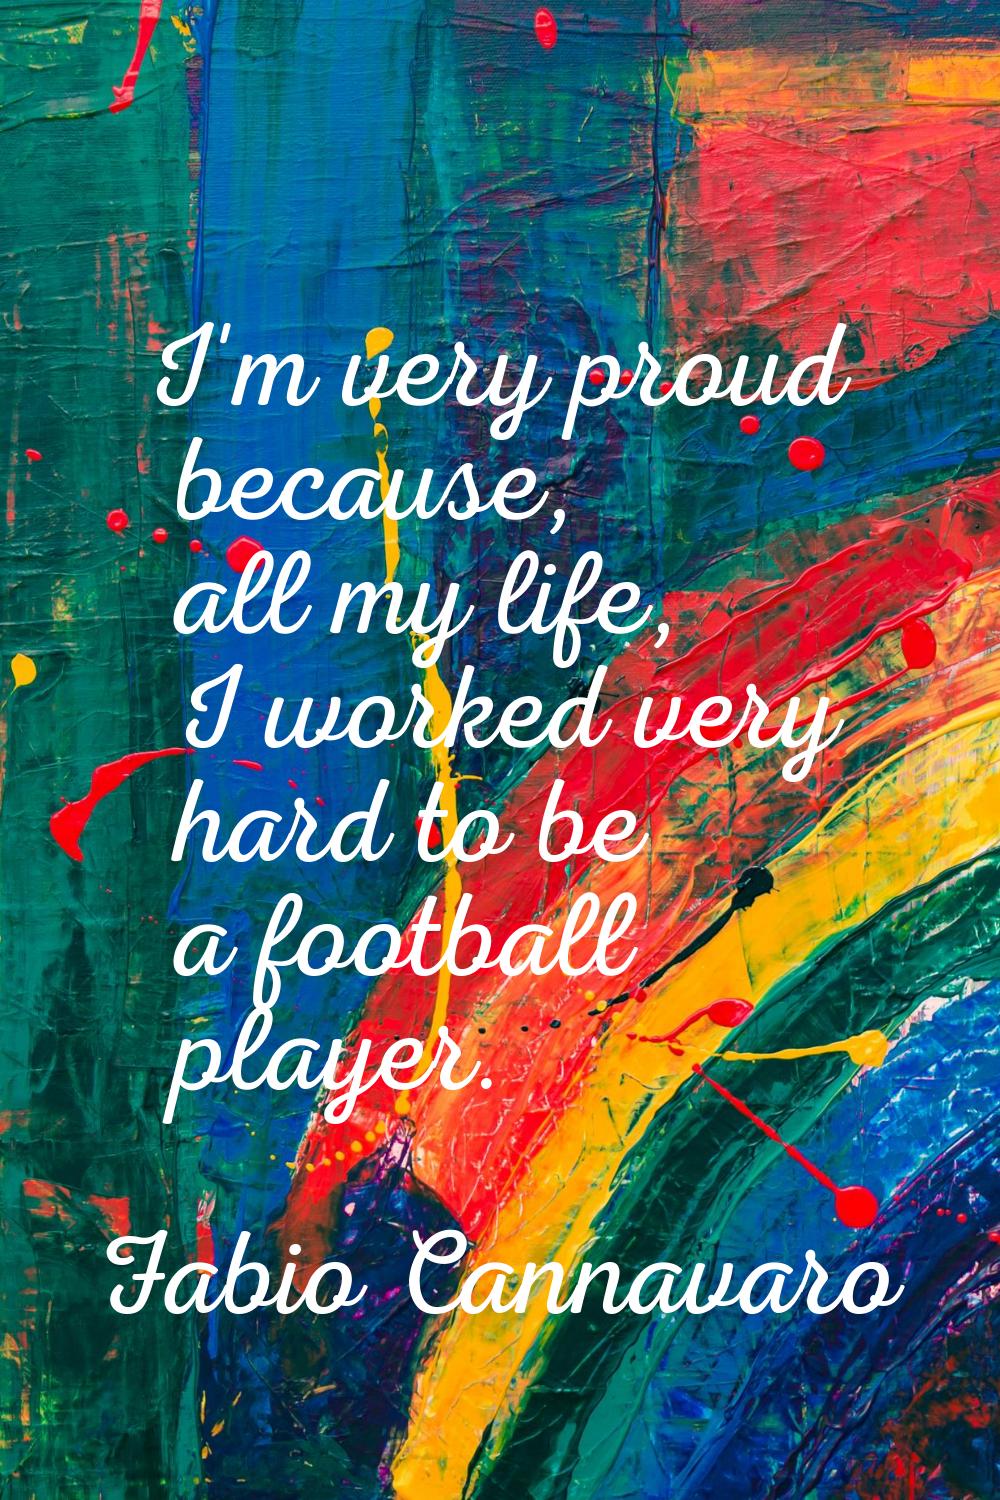 I'm very proud because, all my life, I worked very hard to be a football player.